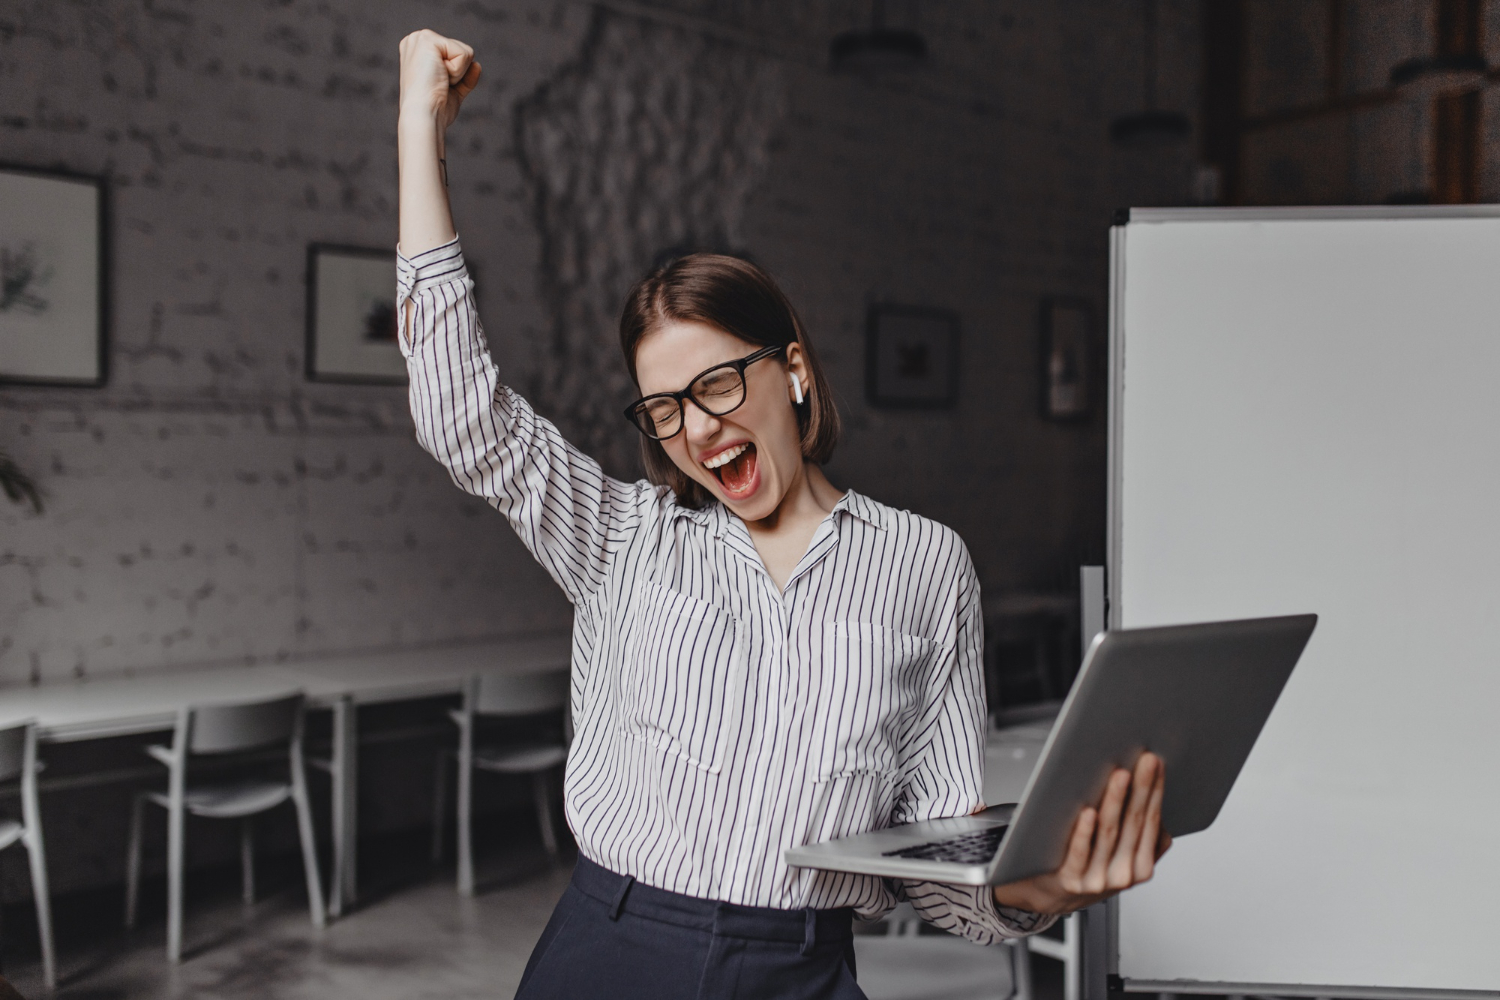 Business Woman With Laptop In Hand Is Happy With Success Portrait Of Woman In Glasses And Striped Blouse Enthusiastically Screaming And Making Winning Gesture